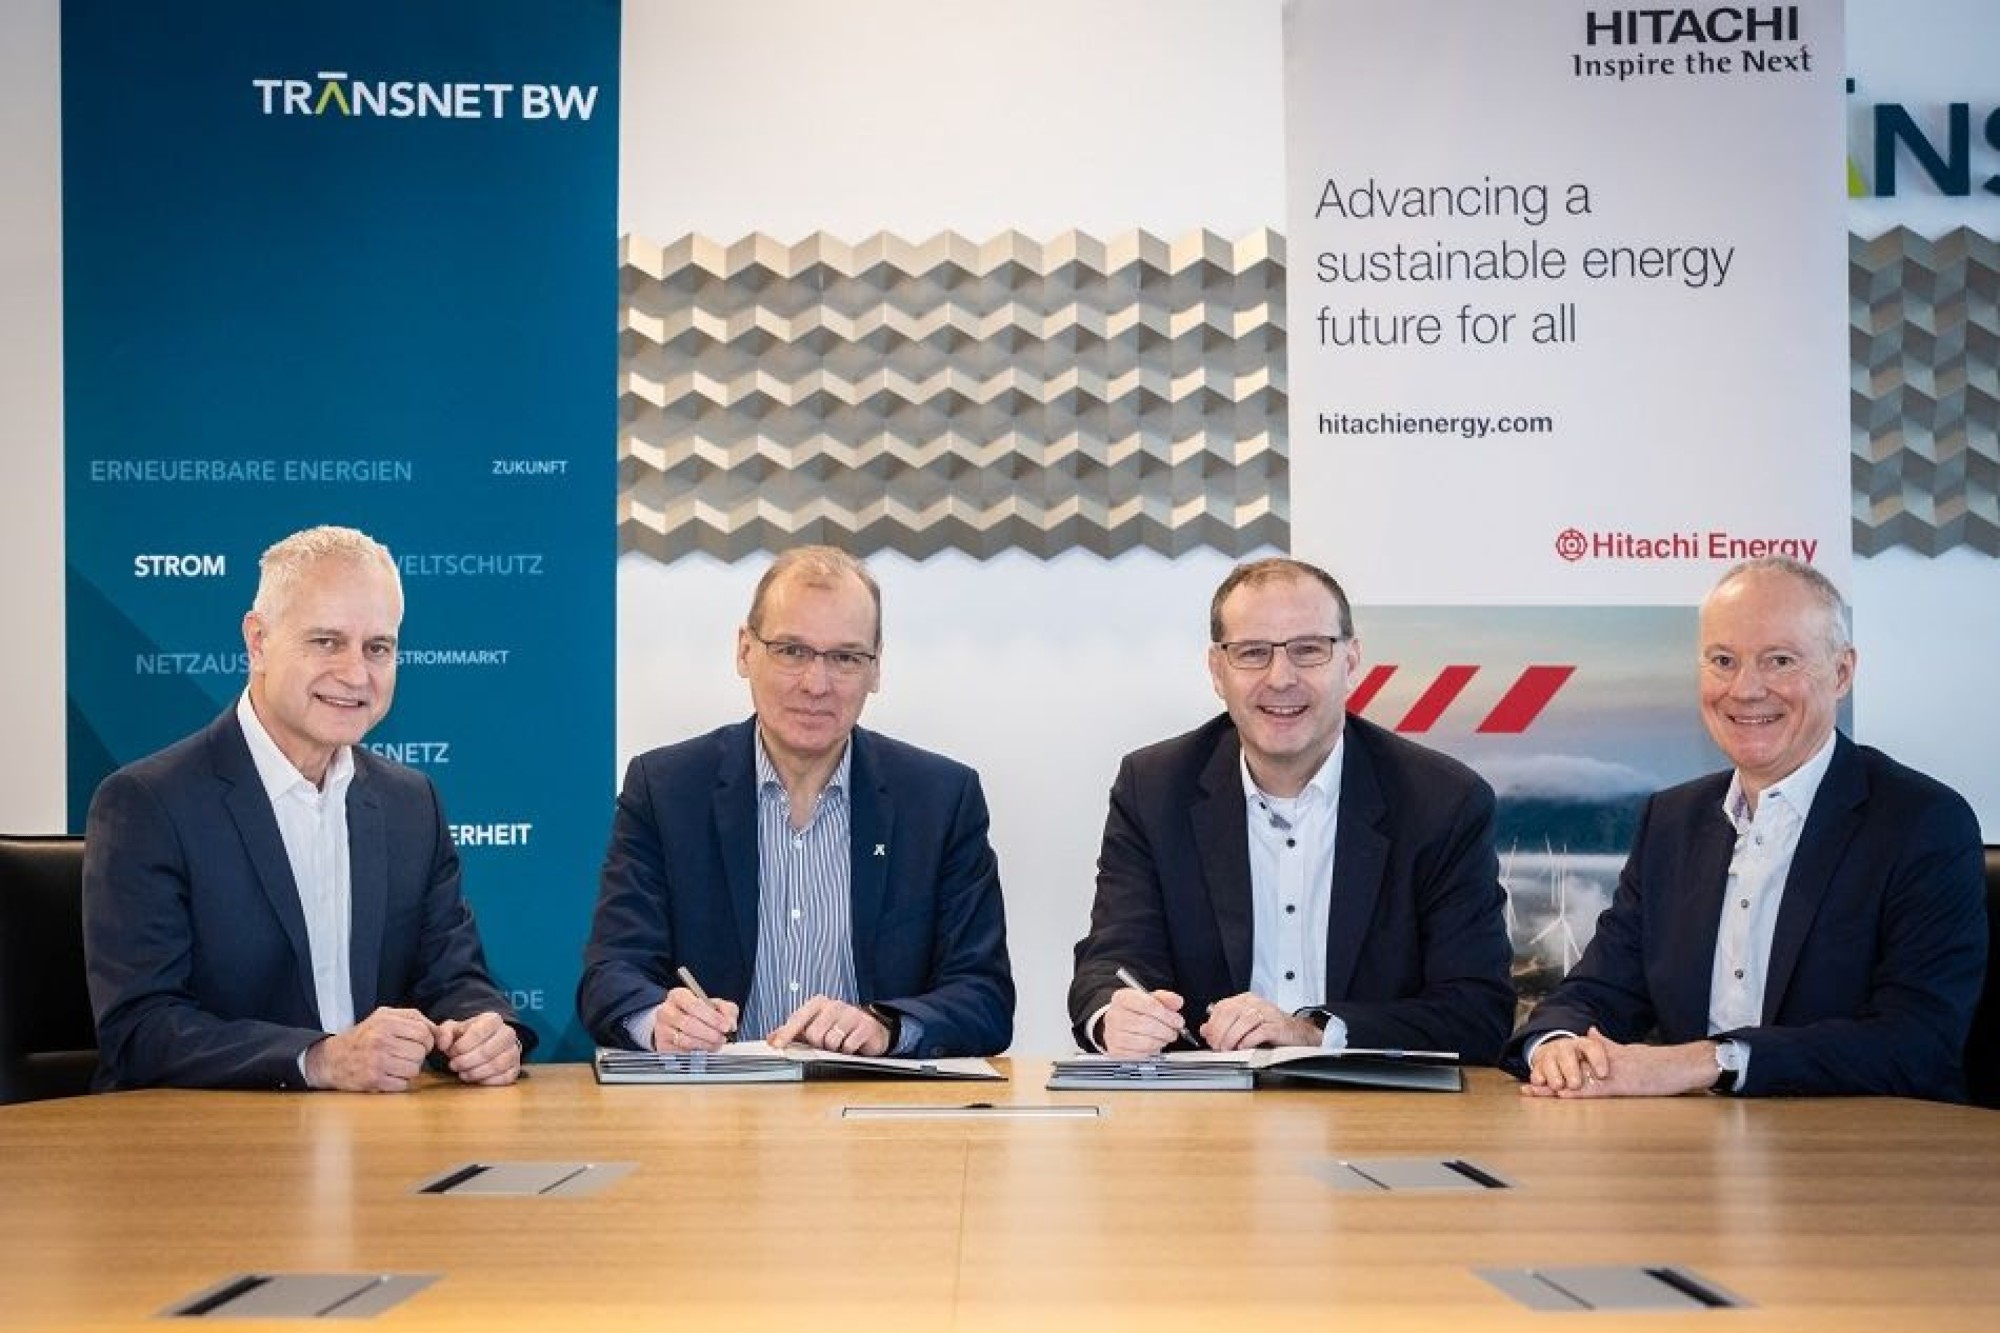 Hitachi Energy and TransnetBW to make German grid fit for future